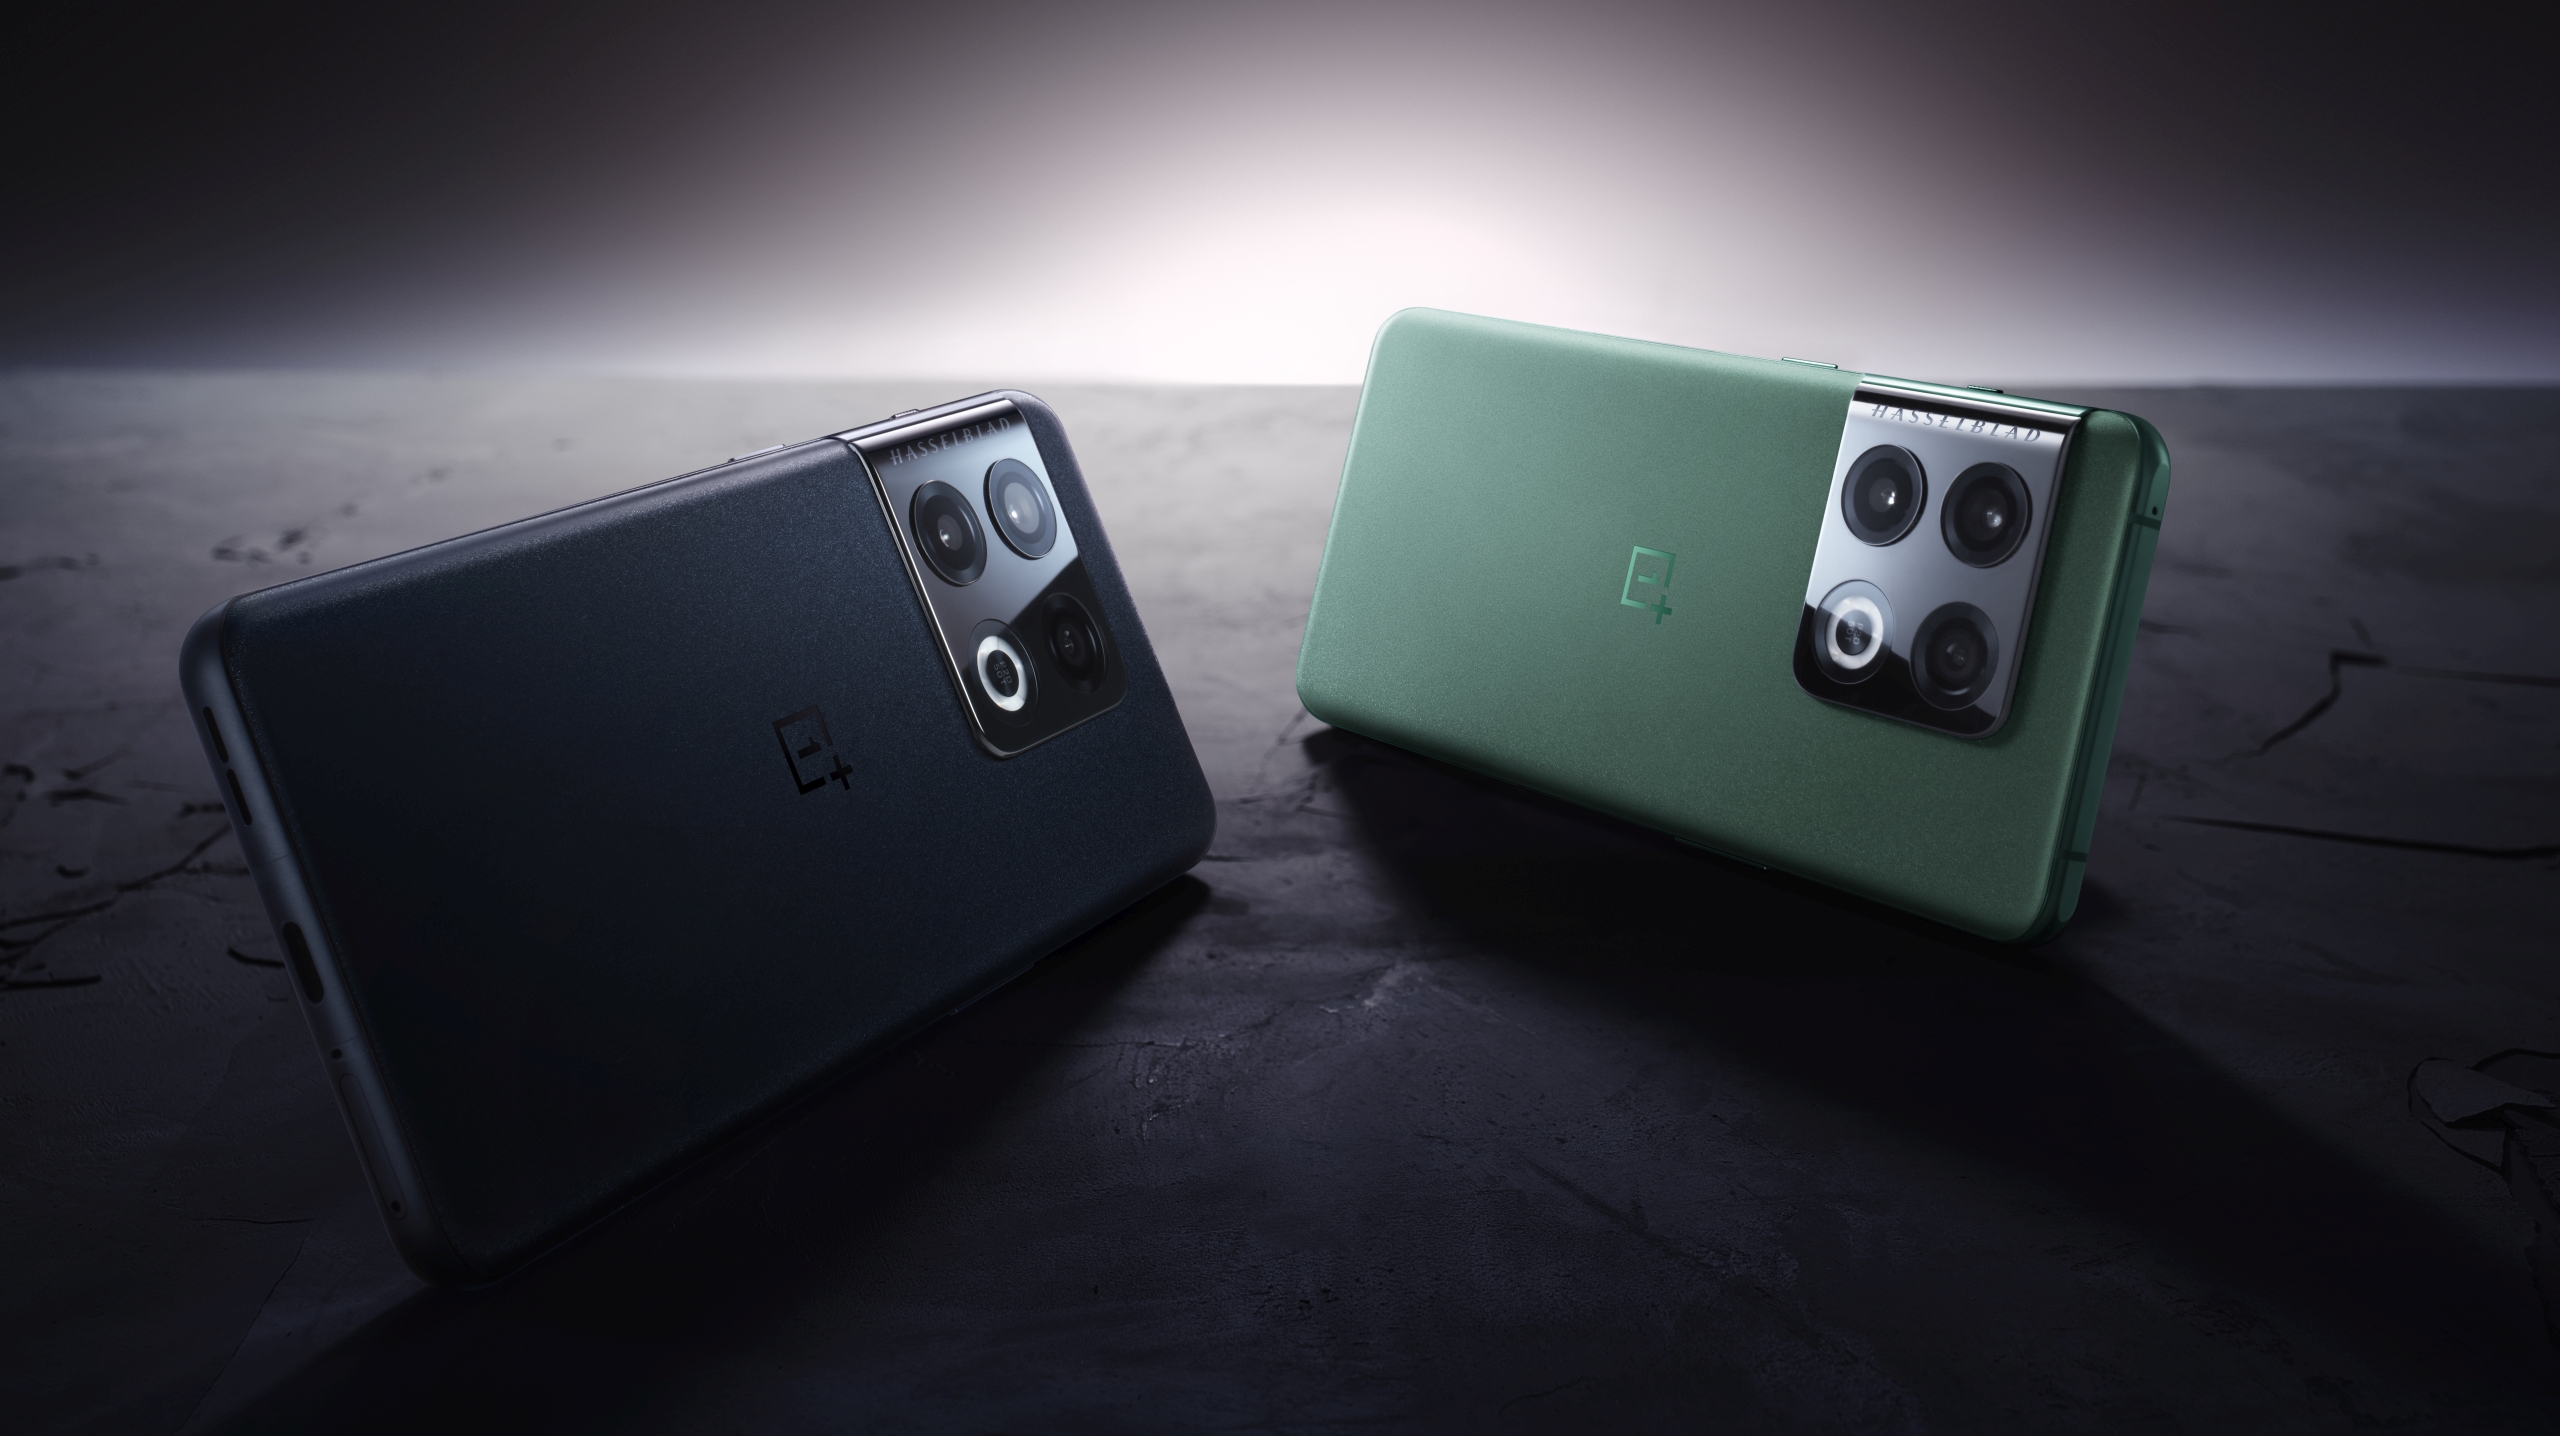 OnePlus 10 Pro shown in both green and black